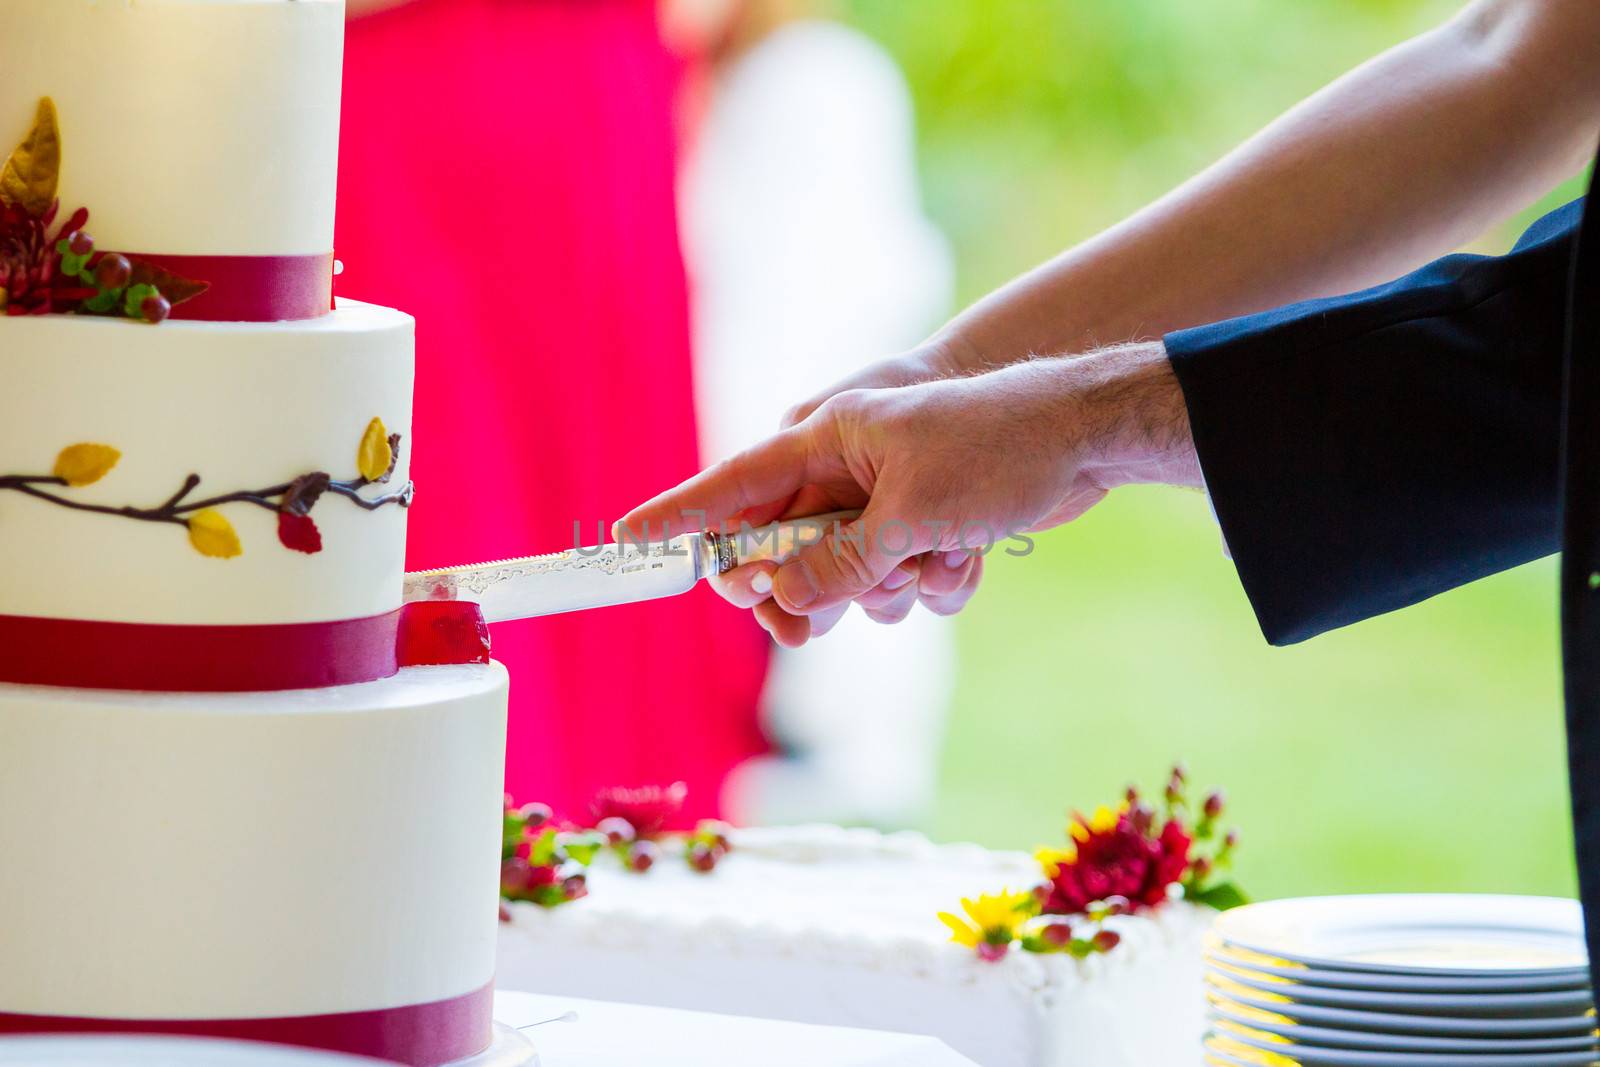 A bride and groom cut the cake together at their wedding reception.